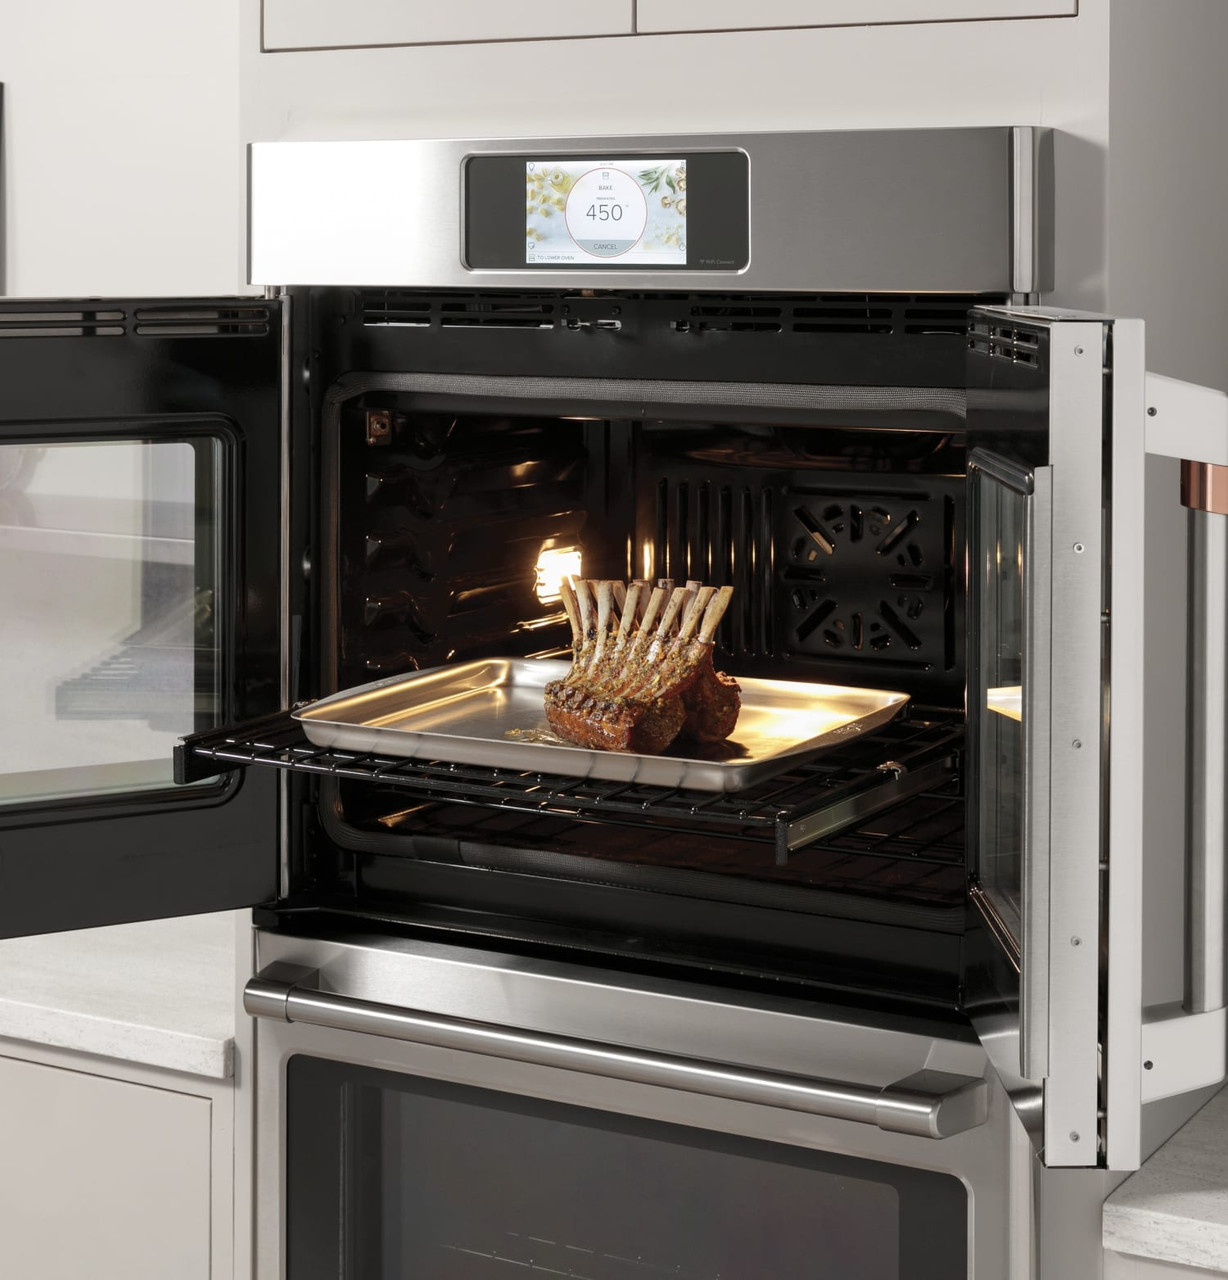 Café™ Professional Series 30” Smart Built-In Convection French-Door Single Wall Oven - Stainless Steel - CTS90FP2NS1